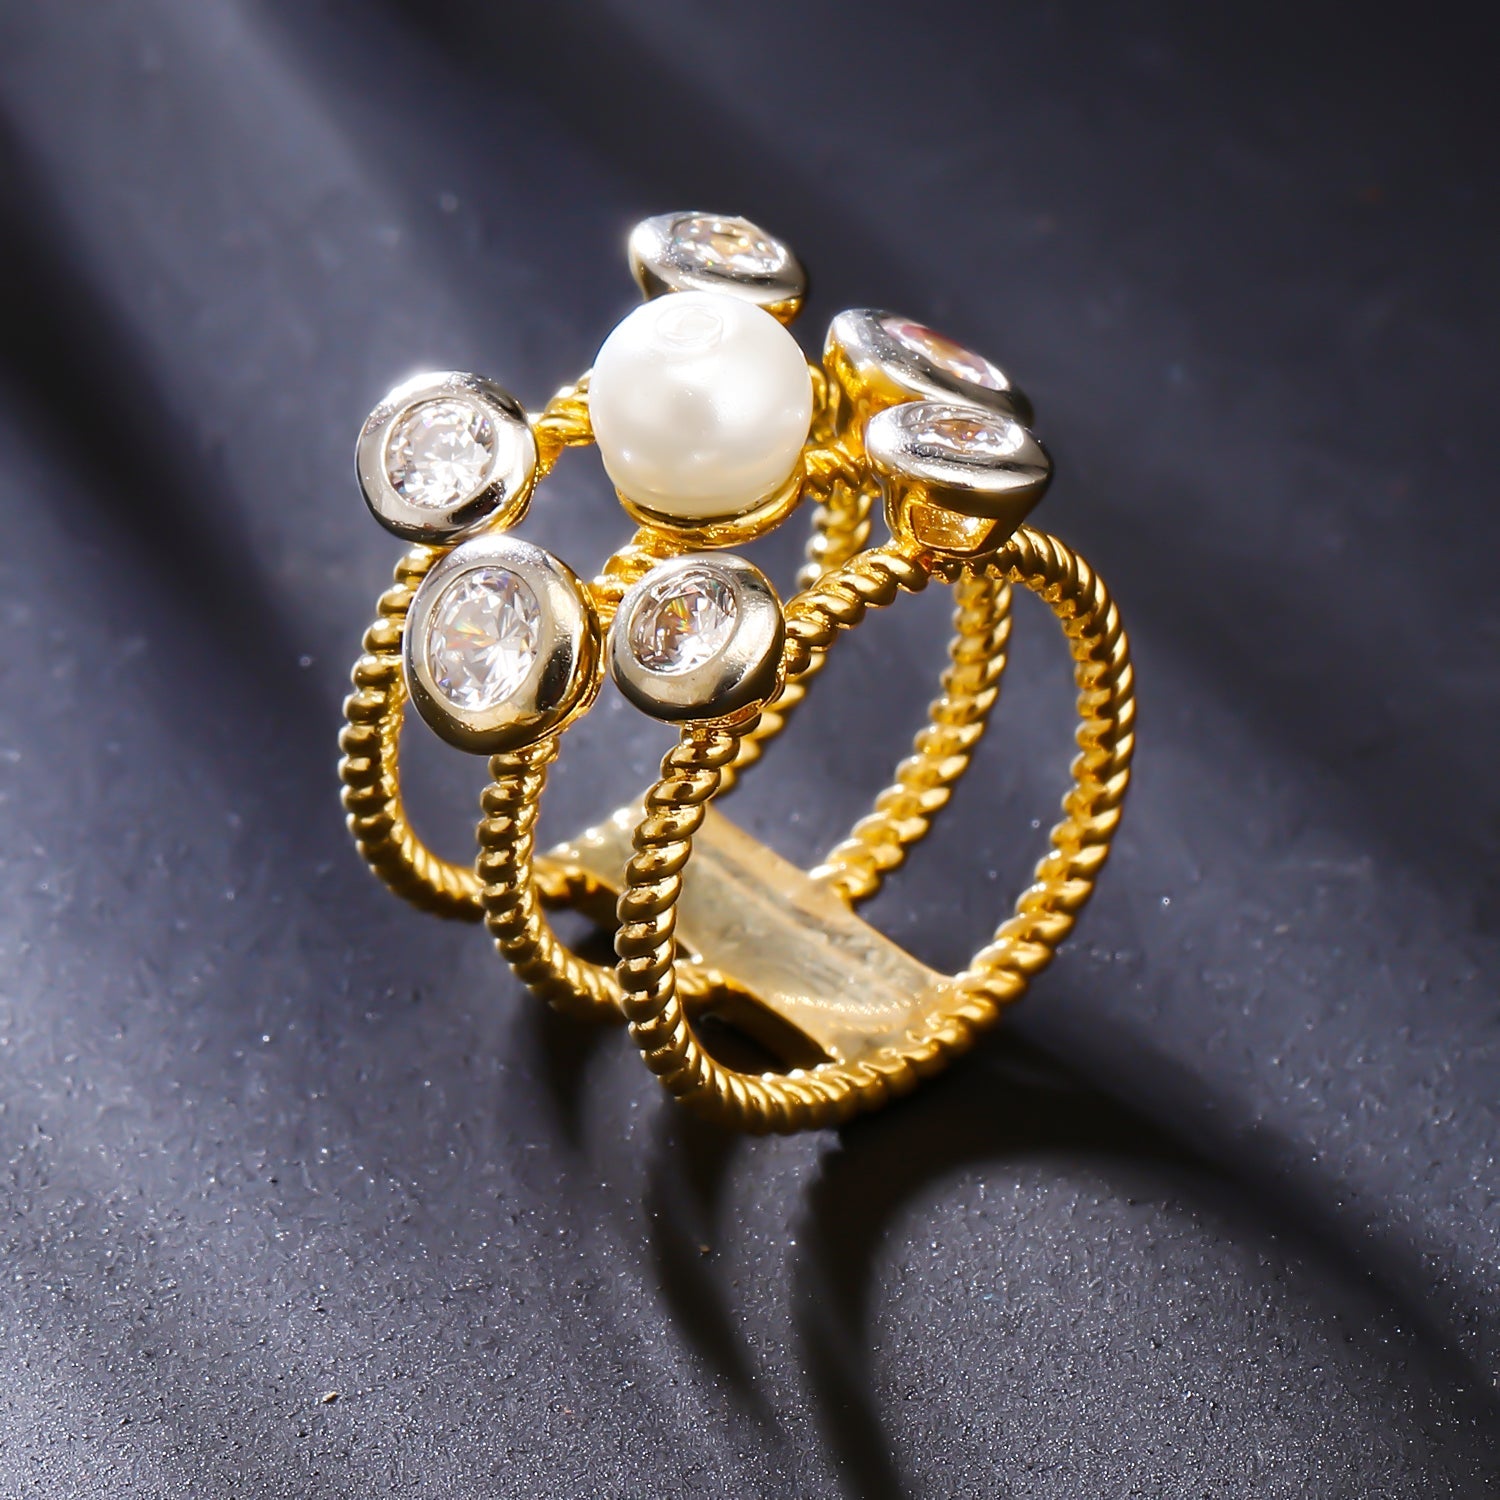 22k Designer Antique Pearl Ring - RiLp11668 - 22K gold ring with Natural  Pearls studded with floral design and Cz stones studded together in two t